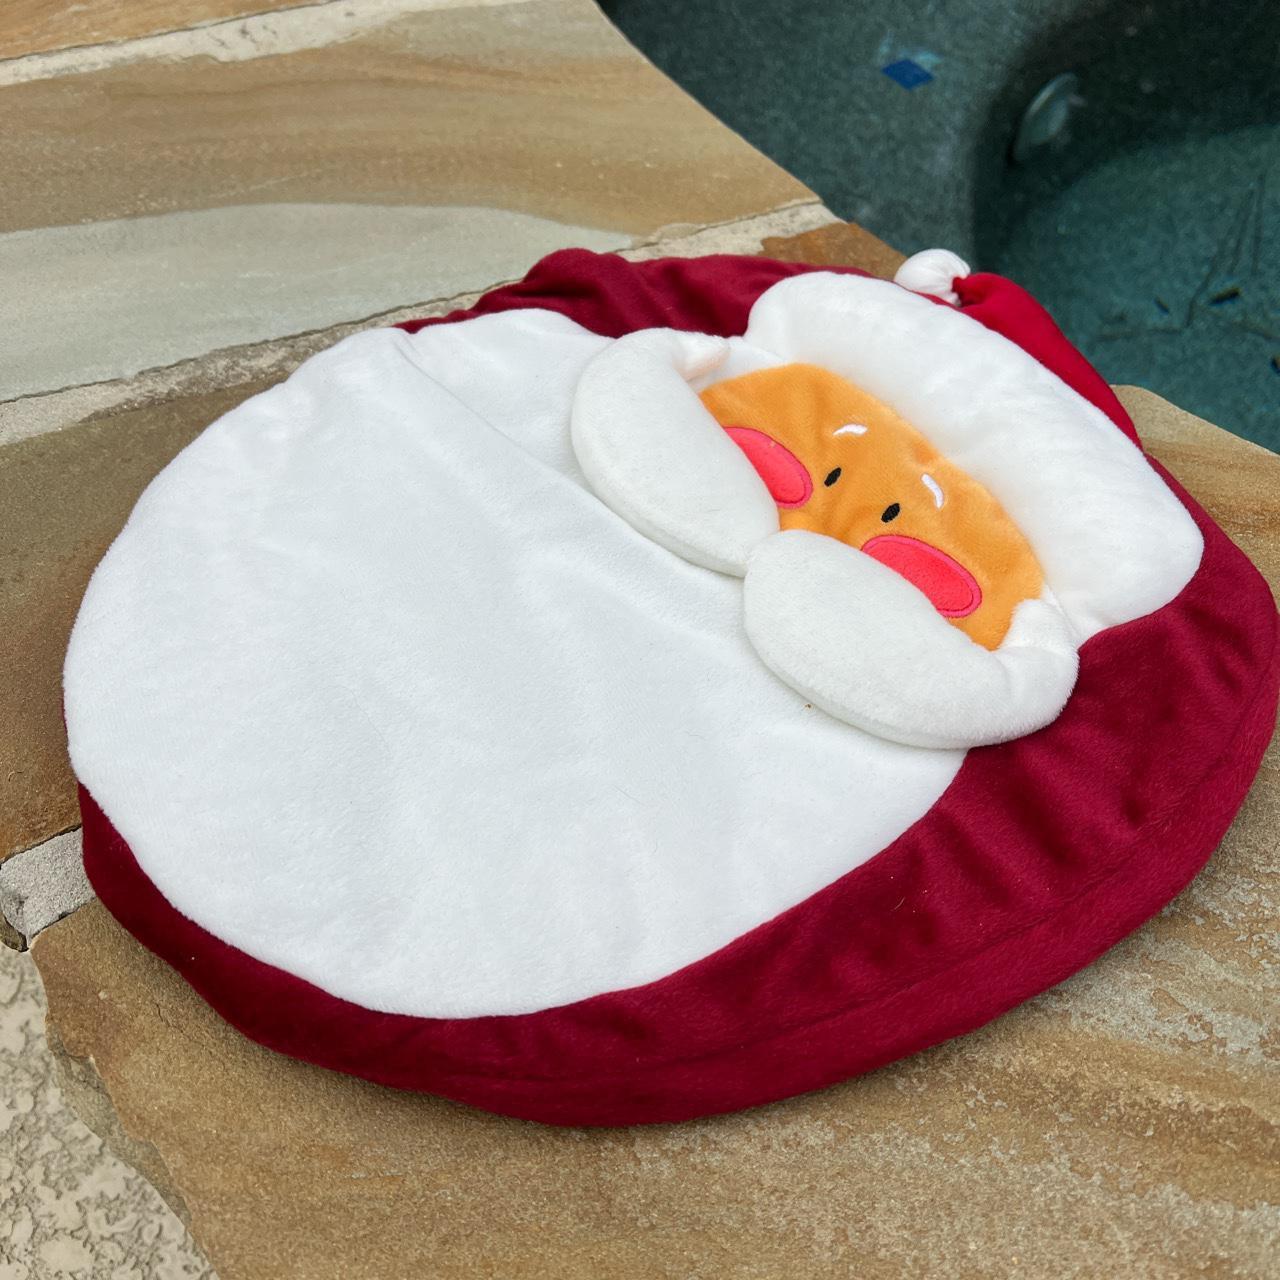 Product Image 2 - GIFTING SANTA TOILET COVER

🌈Standard size